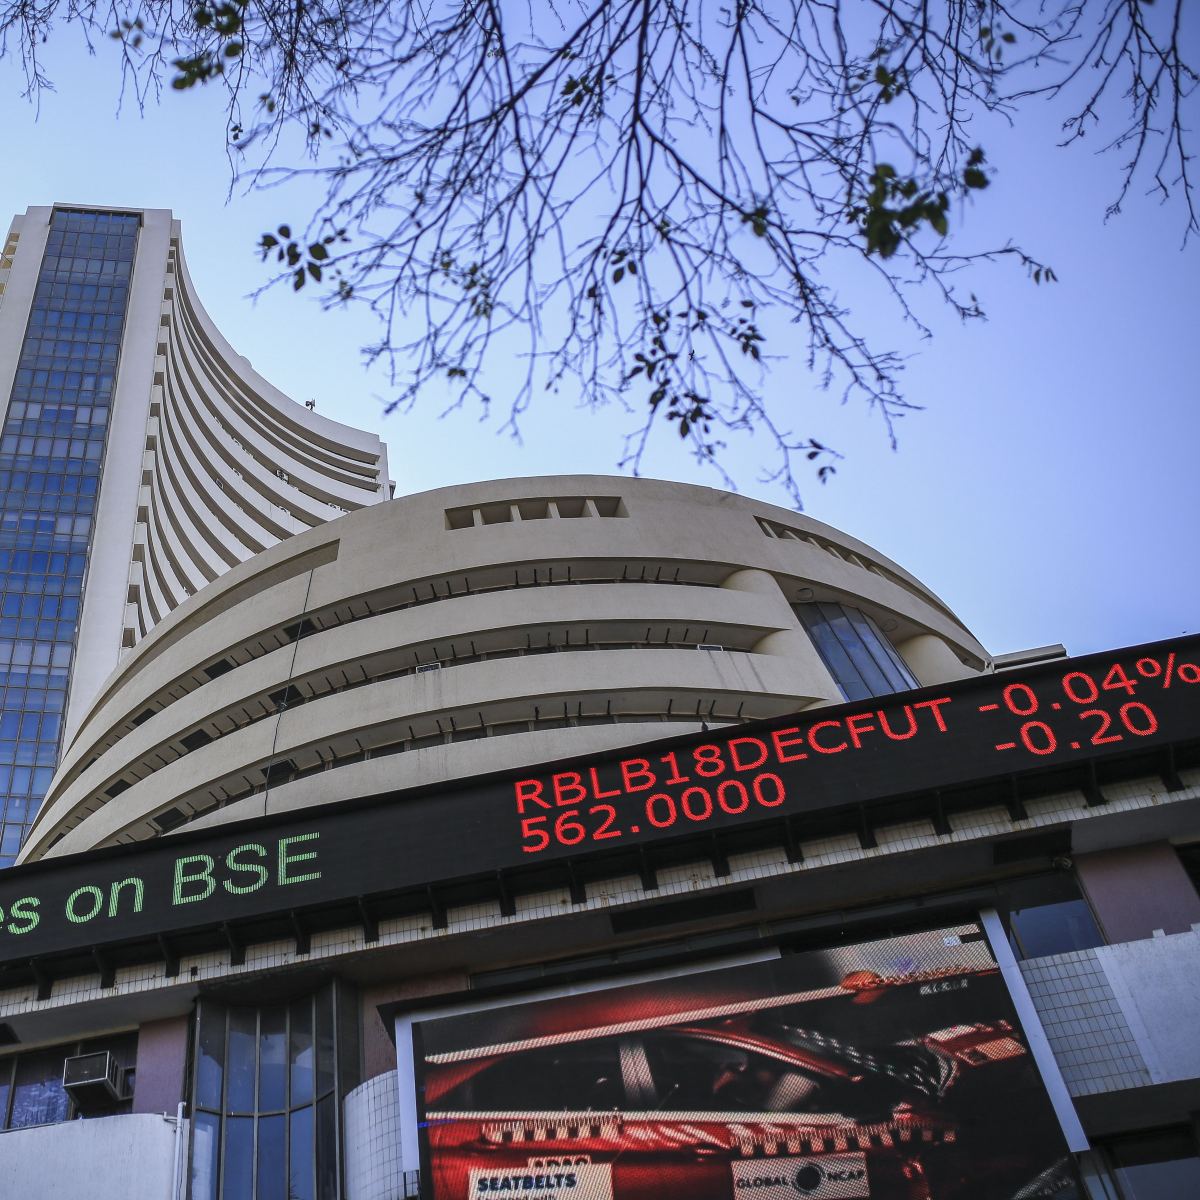 Indian stock market indices fell for the 6th straight session as investors evaded riskier assets on fears that coronavirus Ou